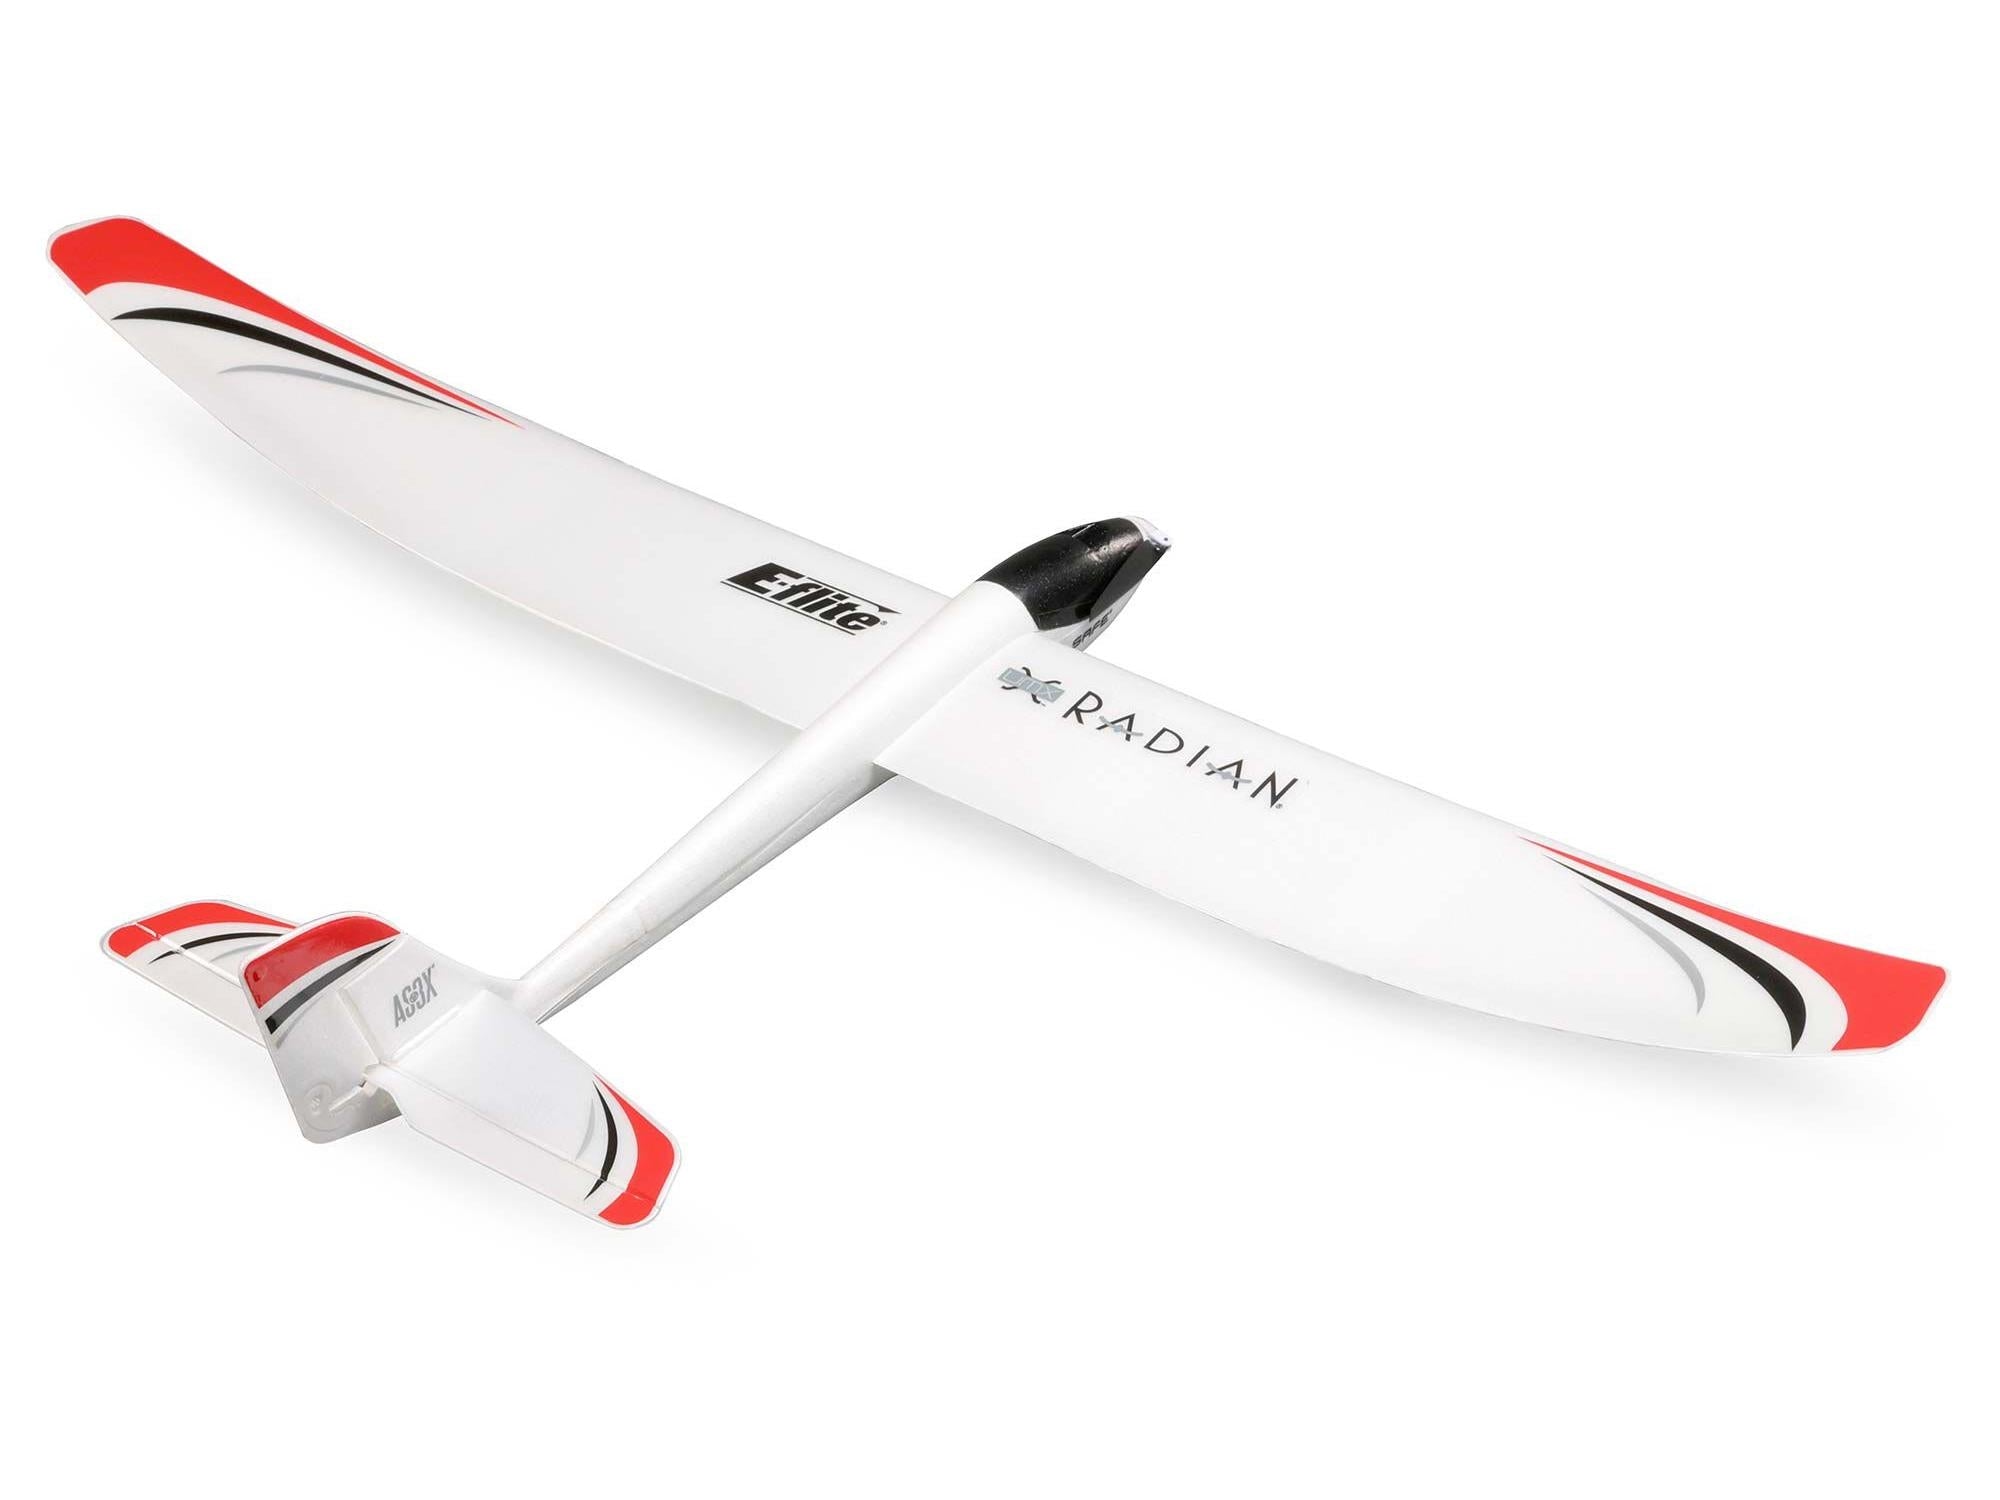 E-Flite UMX Radian BNF Basic with AS3X and SAFE Select EFLU2950